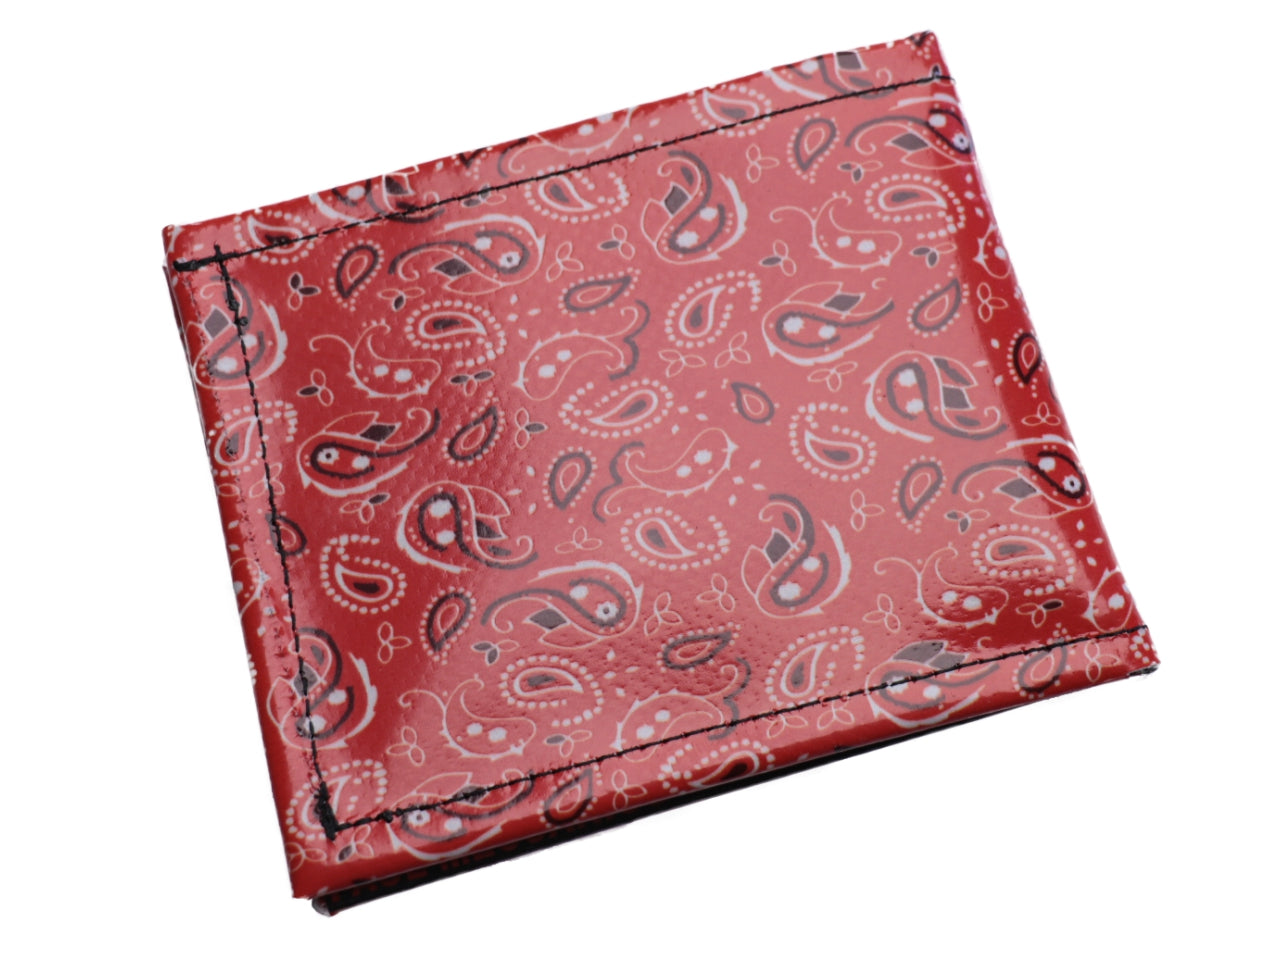 MEN'S WALLET RED WITH PAISLEY FANTASY. MODEL CRIK MADE OF LORRY TARPAULIN. - Limited Edition Paul Meccanico